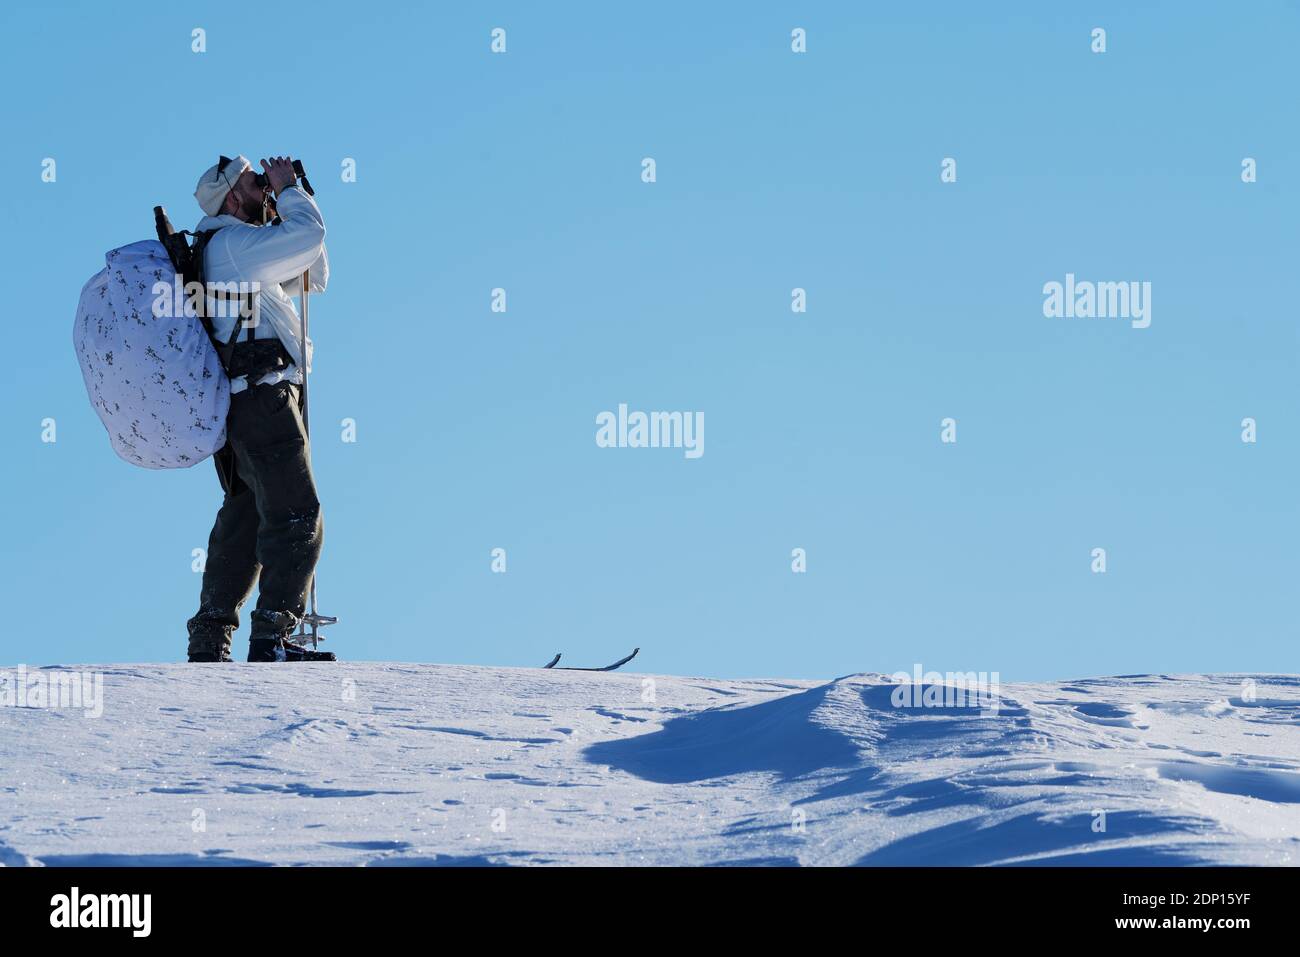 Cross country skier against blue sky Stock Photo